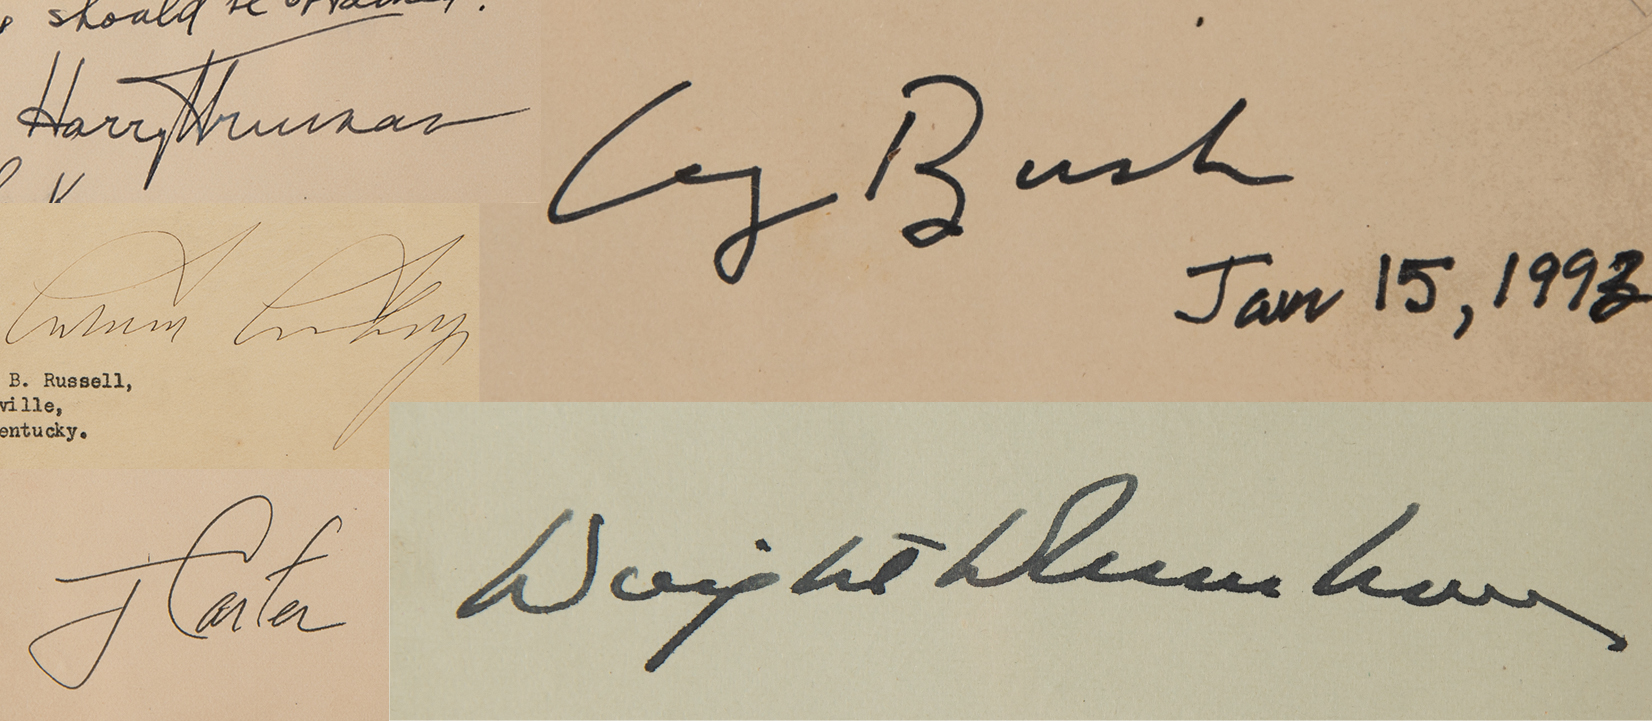 Lot #38 Six Presidential Signatures of Coolidge, Truman, Eisenhower, Nixon, Carter, and Bush, Collected as Part of a 47th United States Congress Autograph Album with (300+) Signatures - Image 1